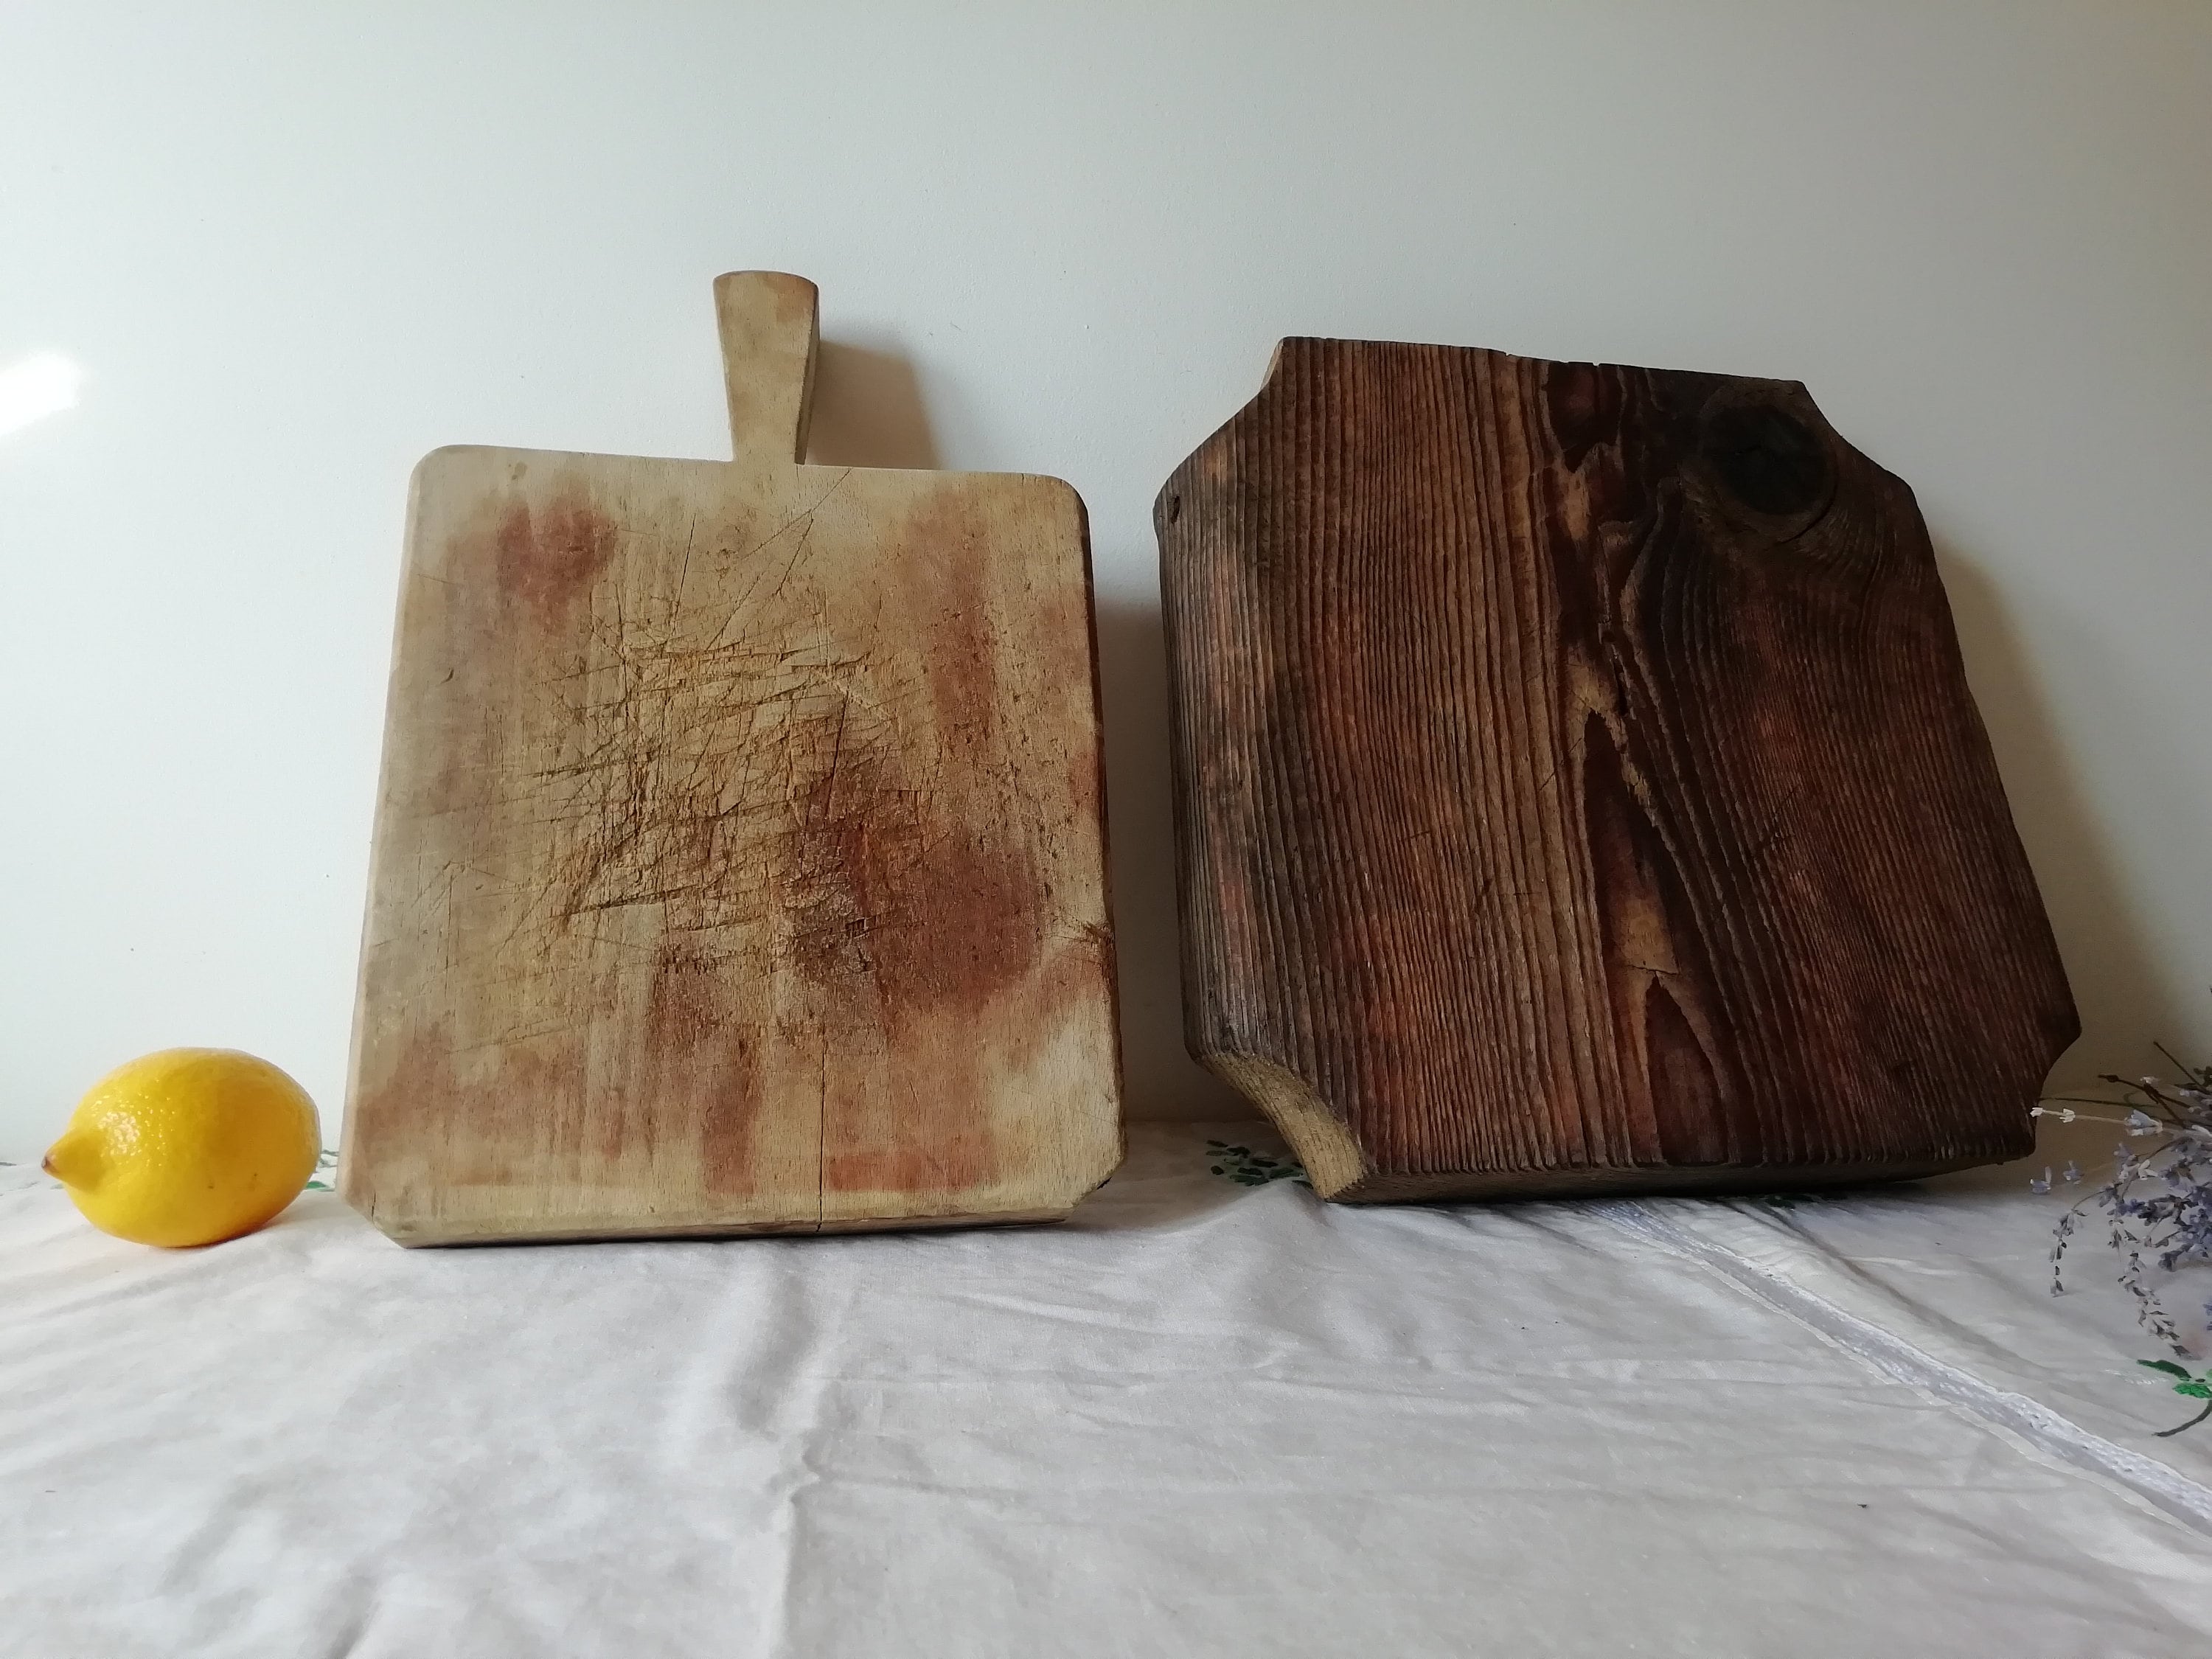 Cutting Board With Handle Customizable in Olive Wood, Chopping Boards Olive  Wood, Meat and Cheese Tray, Bread Cutter Board 